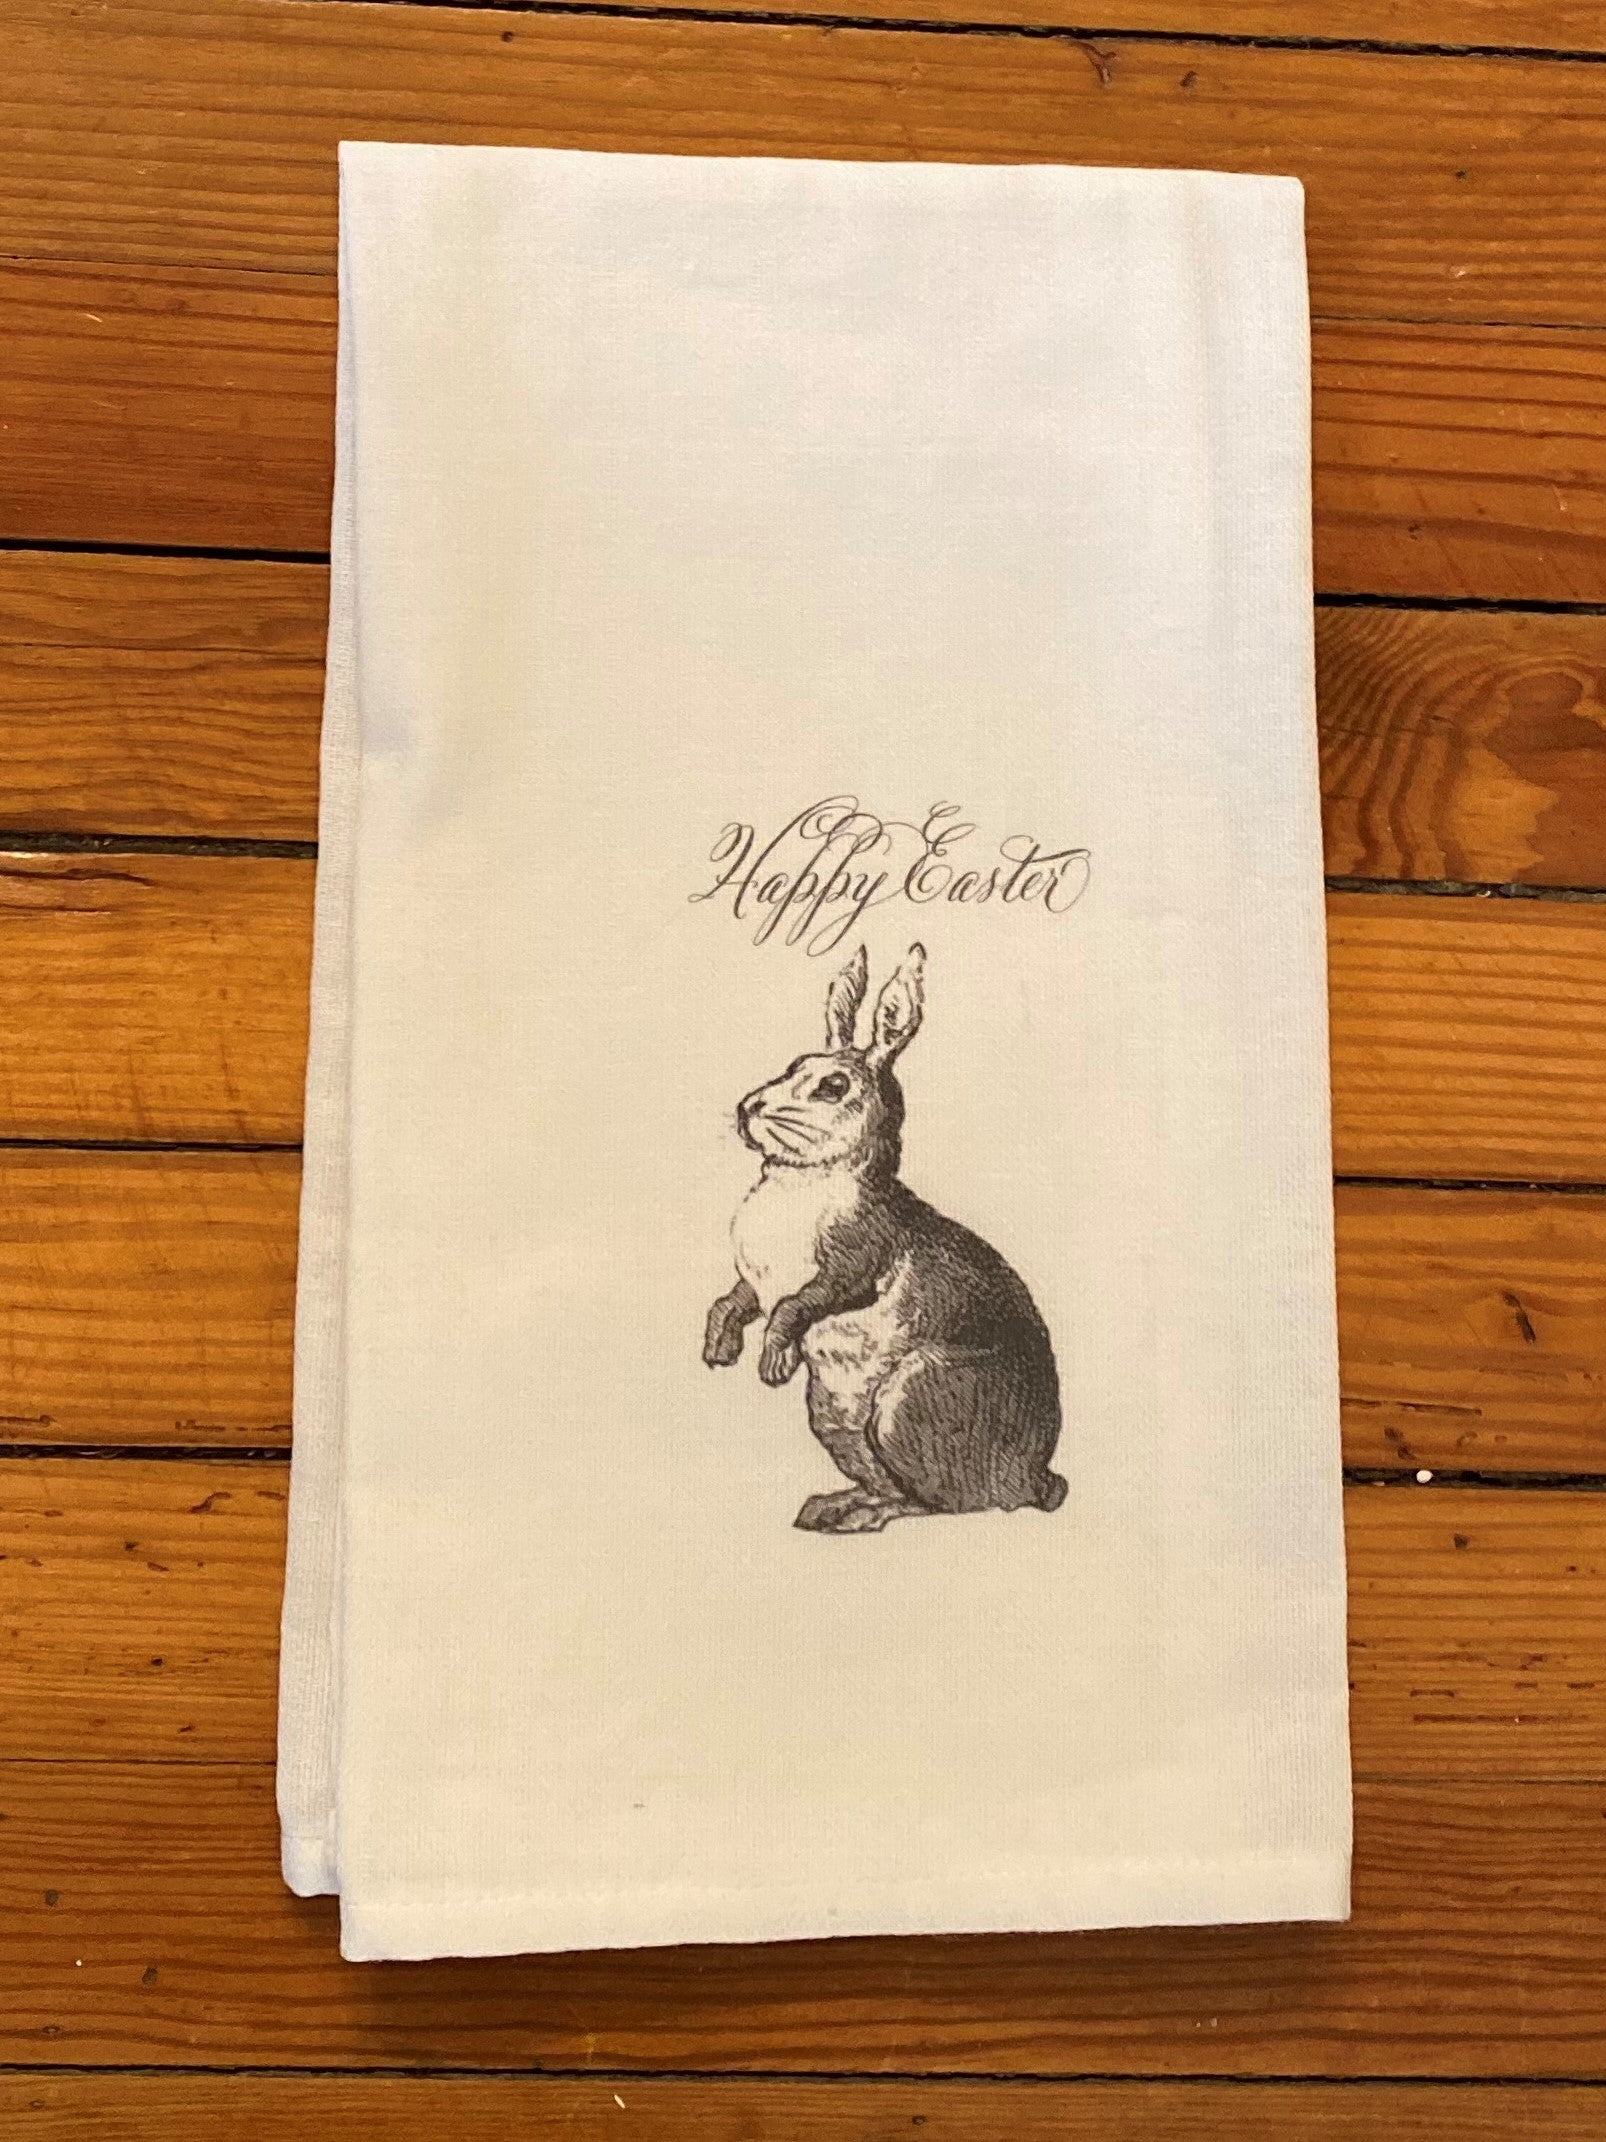 What a sweet, precious tea towel for Easter! It features a gray bunny with "Happy Easter" lettering. What a precious keepsake for the season!  Details:   ​100% Cotton Dimensions 20x25 inch